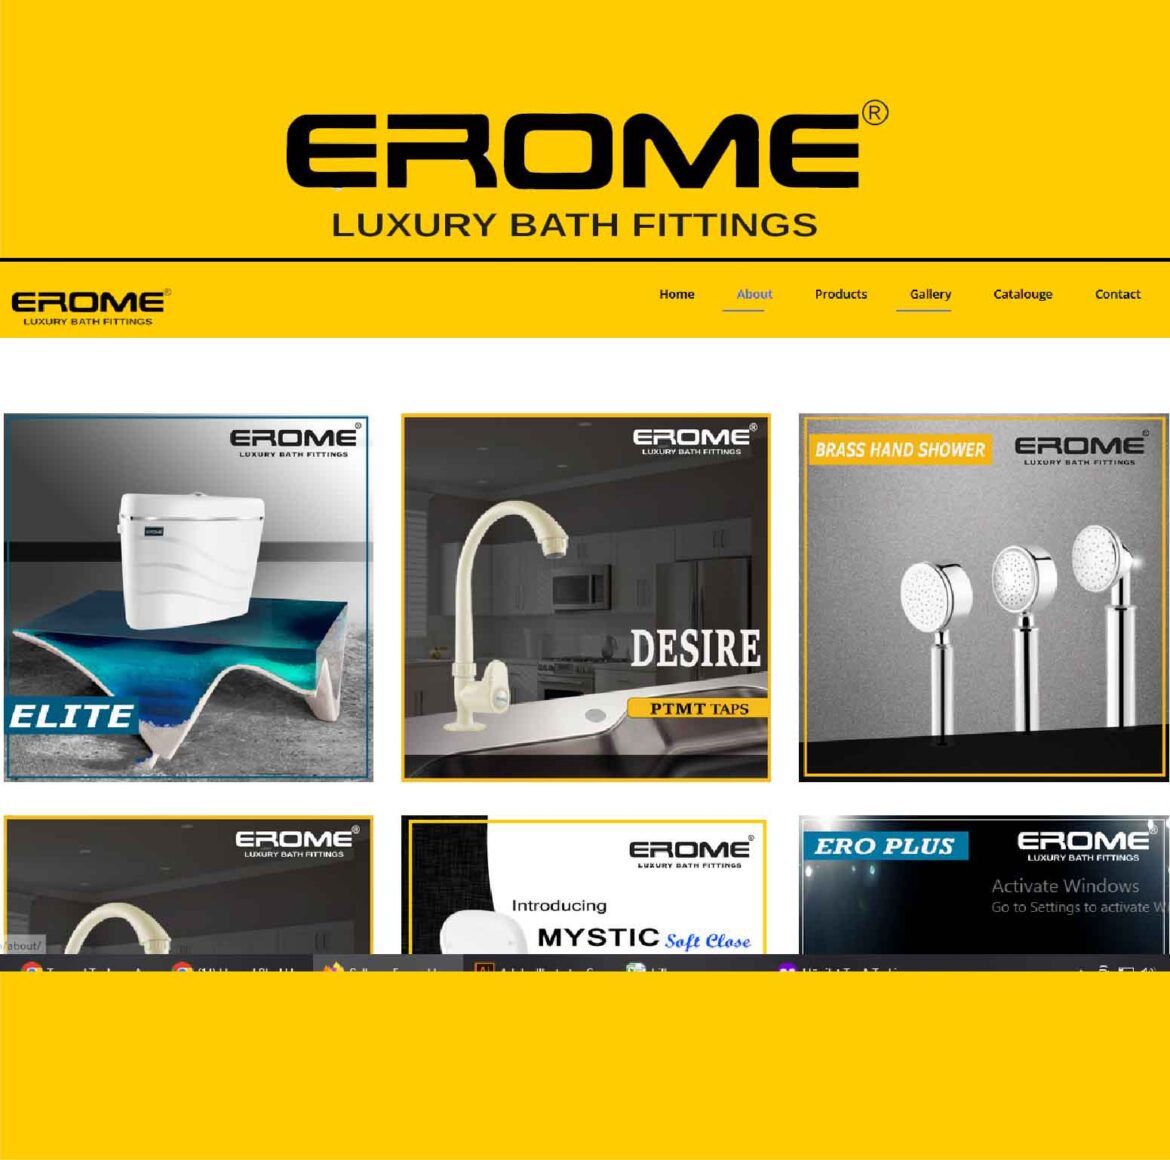 Erome Bathroom Accessories: Elevating Interiors with Style and Innovation